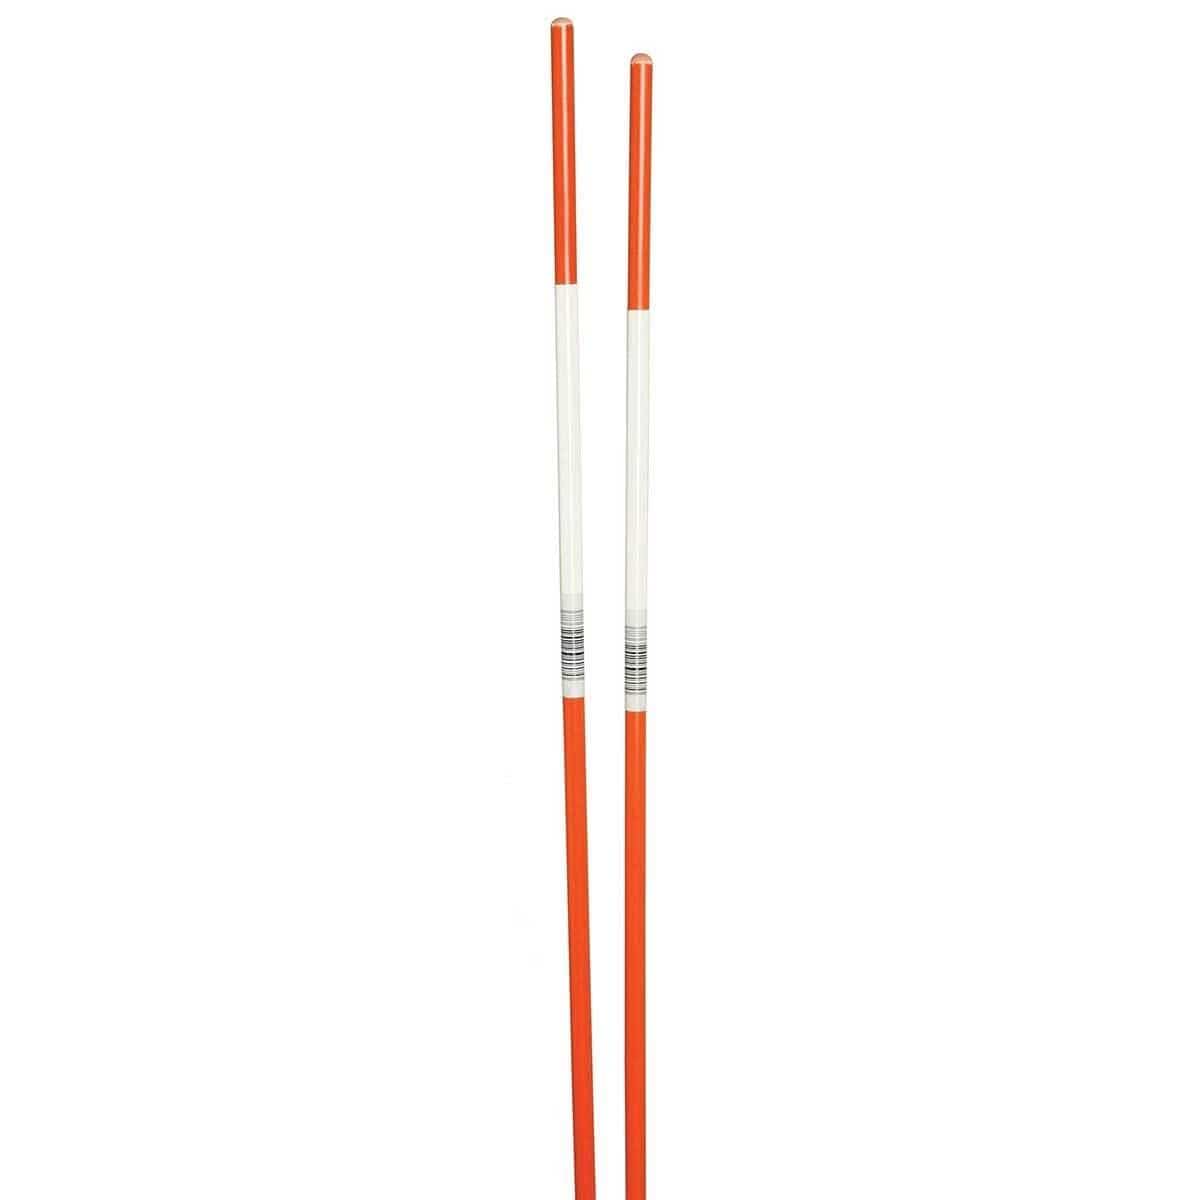 High-Visibility Orange Property Markers, 6'L